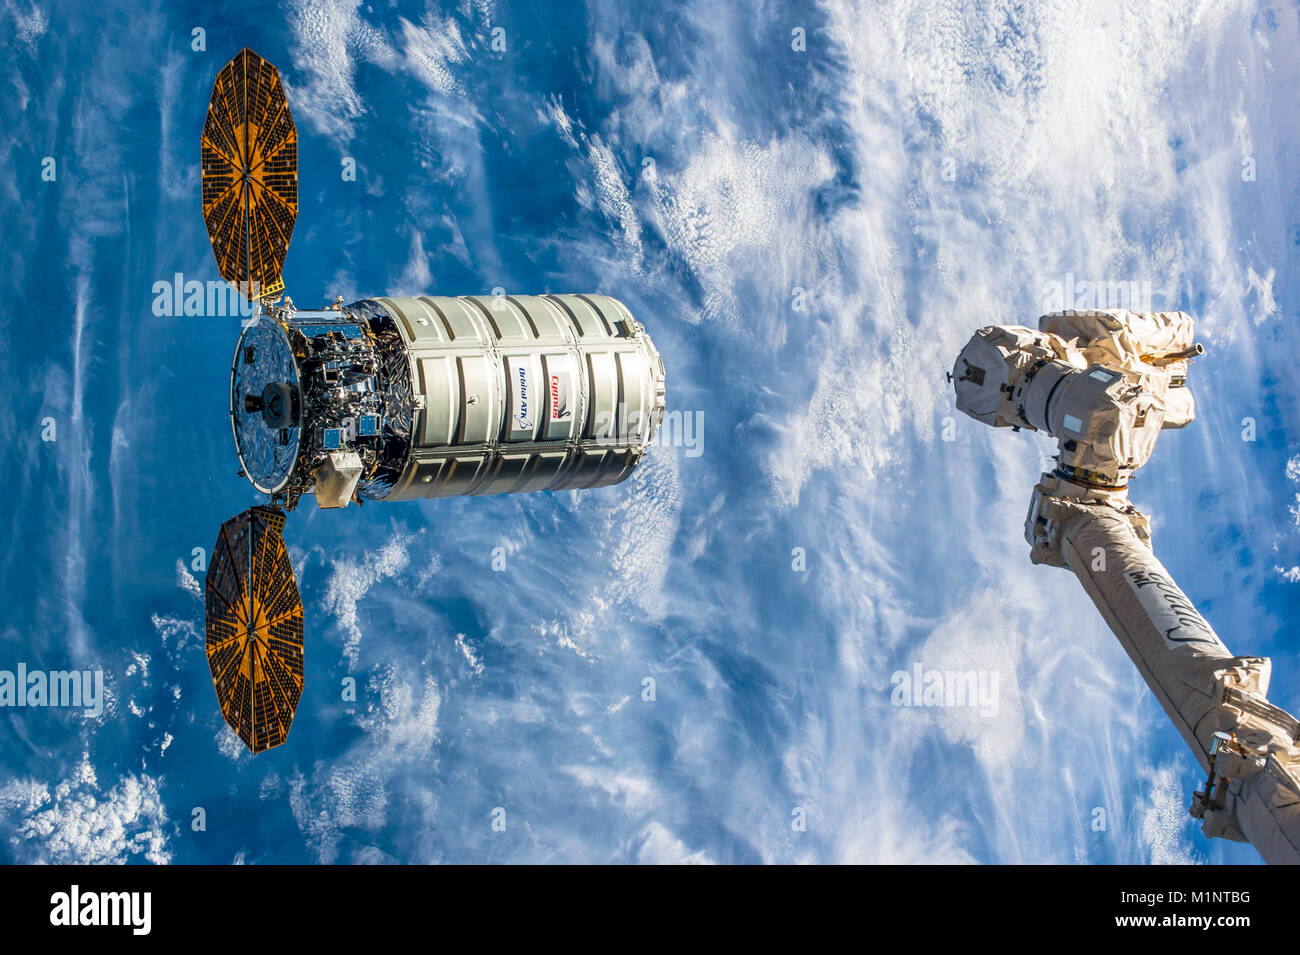 The Cygnus spacecraft is an American automated cargo. It was developed Orbital ATK. The Canadarm is extending to get a grip of the ship. This image el Stock Photo